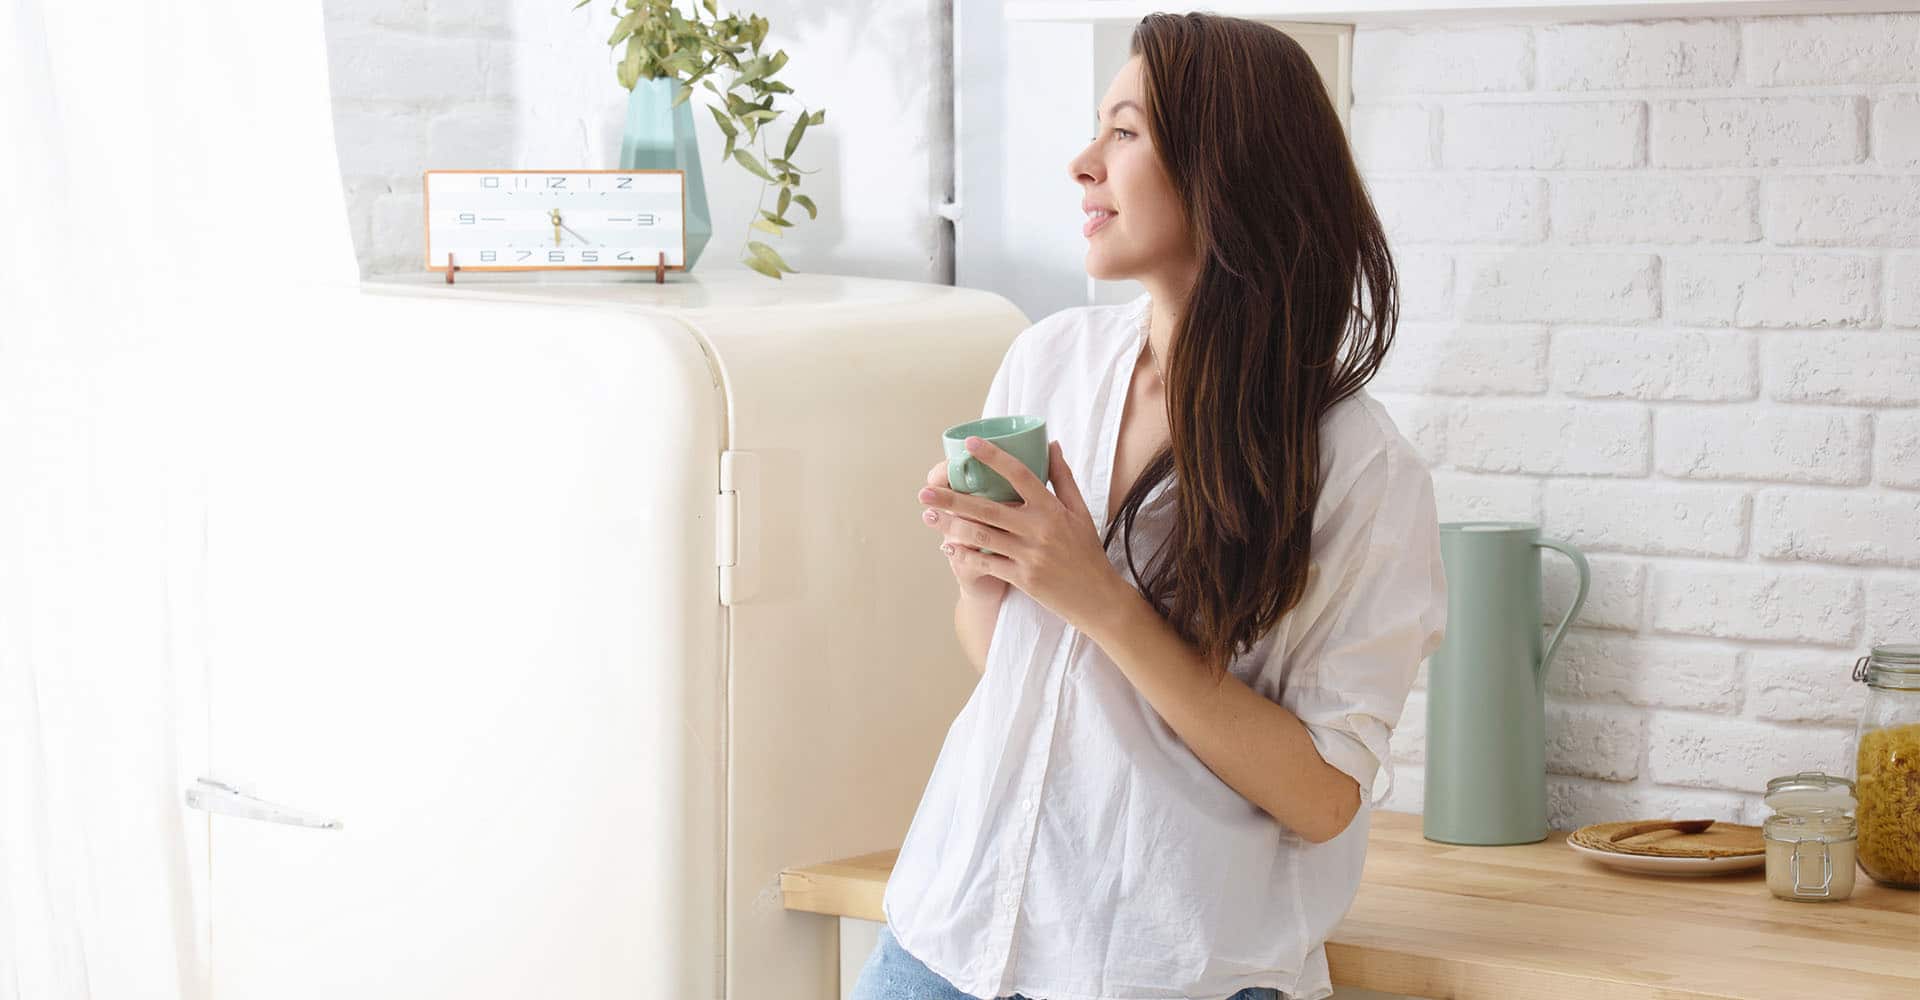 Woman with morning routine drinking coffee